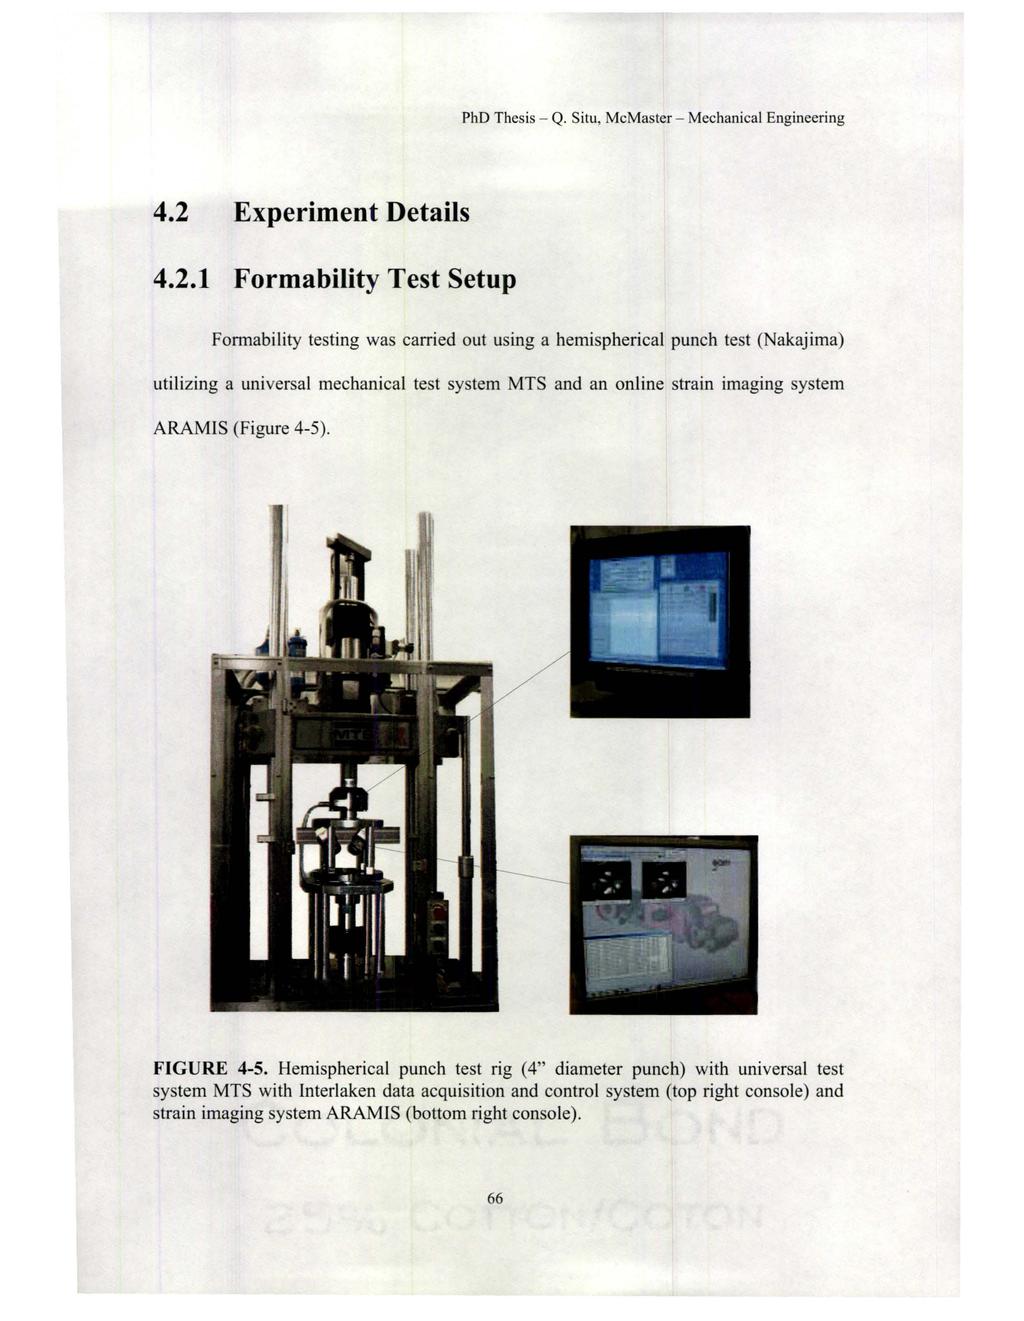 4.2 Experiment Details 4.2.1 Formability Test Setup Formability testing was carried out using a hemispherical punch test (Nakajima) utilizing a universal mechanical test system MTS and an online